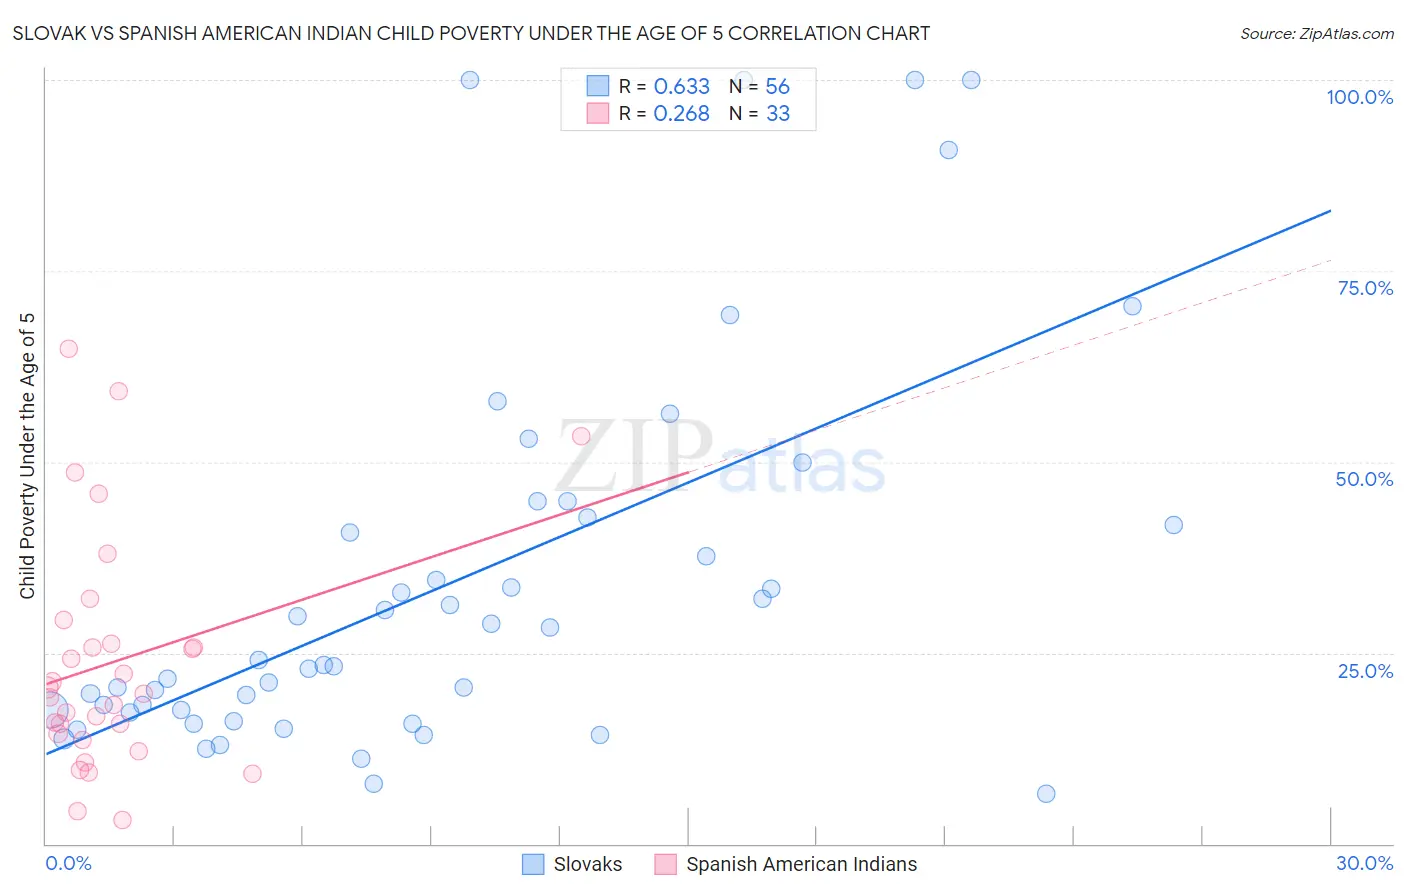 Slovak vs Spanish American Indian Child Poverty Under the Age of 5